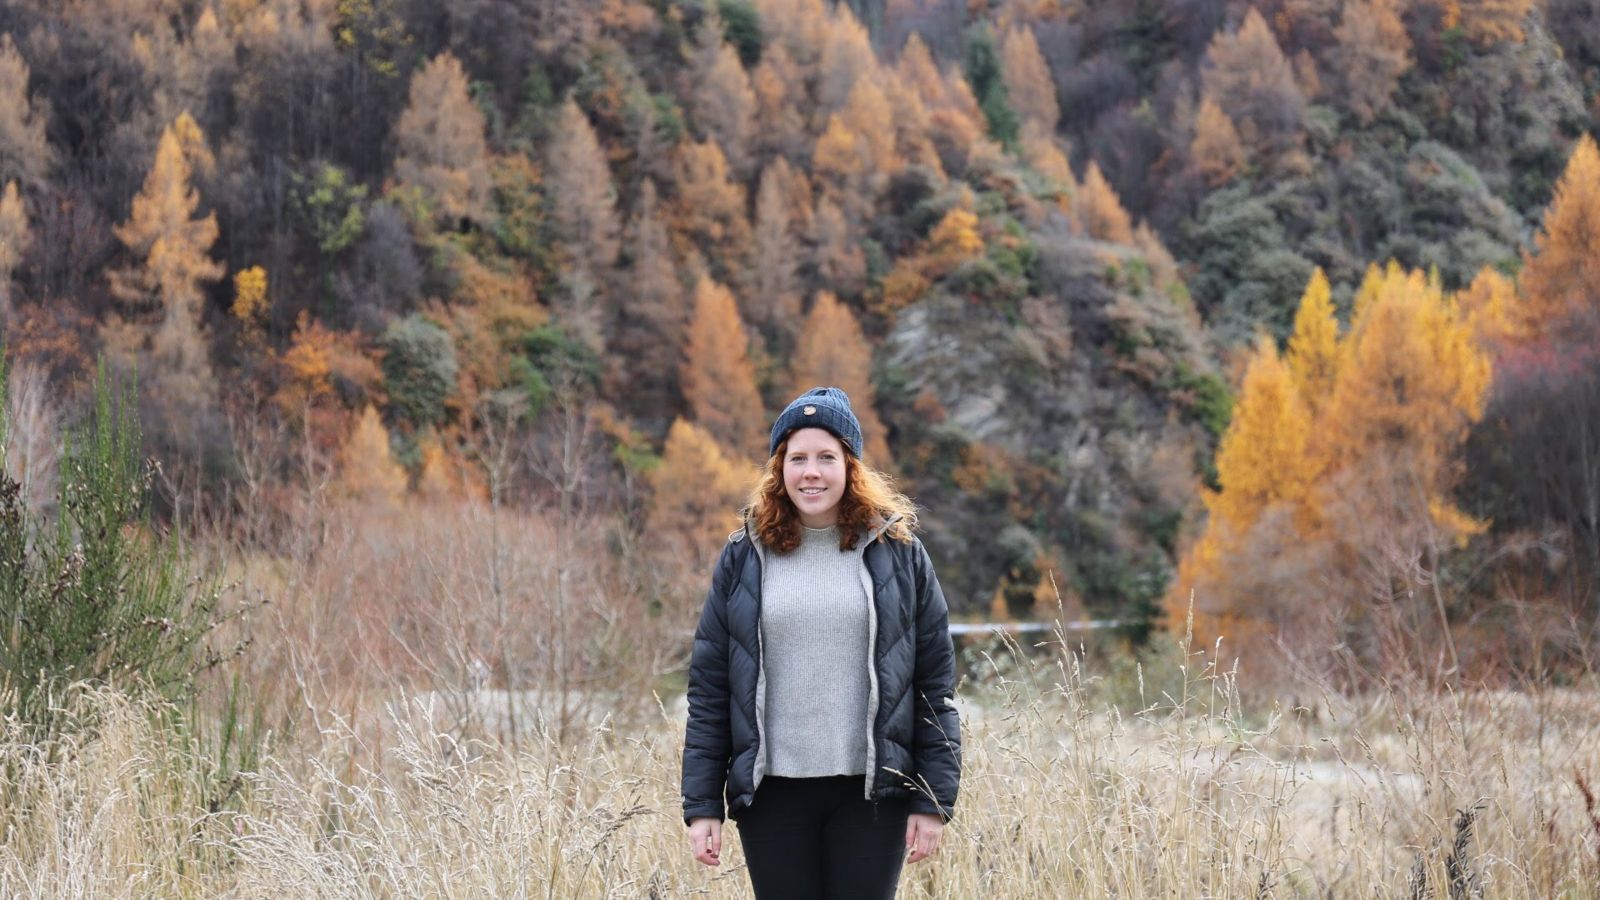 Sarah Rowley Adams stands in an autumnal forest, smiling at the camera. Sarah wears a grey sweater, black puffer coat and dark beanie. 